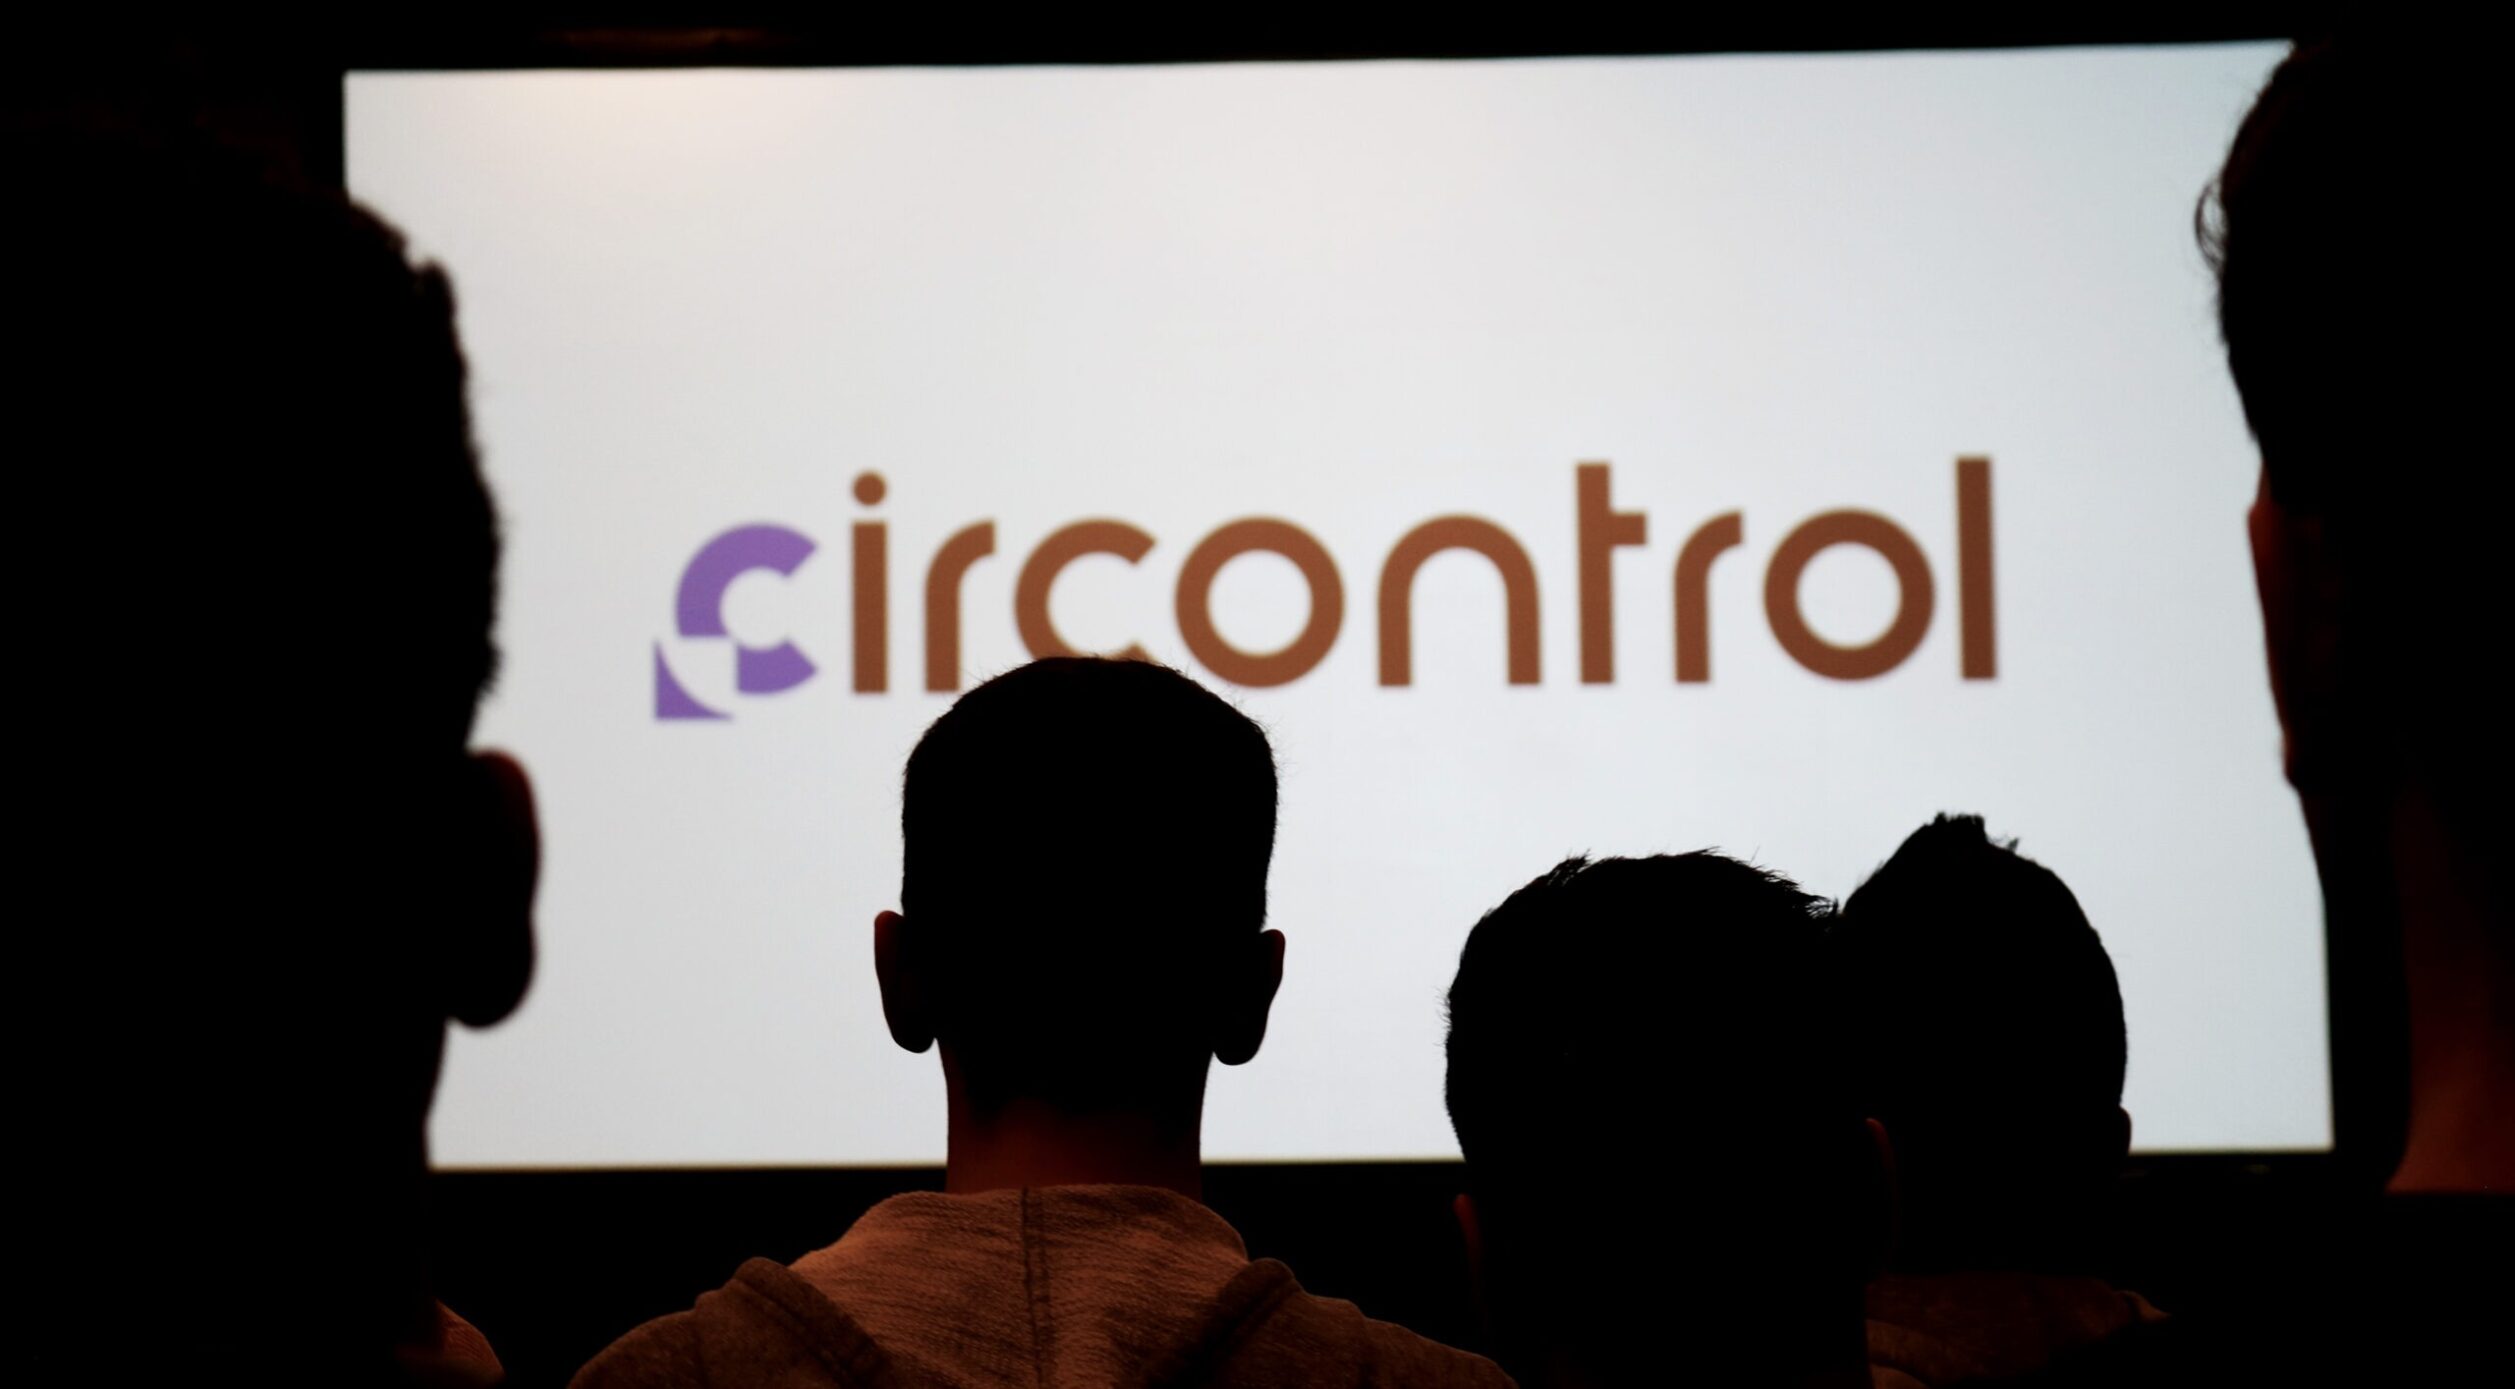 Circontrol starts a new corporate era after a 2022 of strong international growth